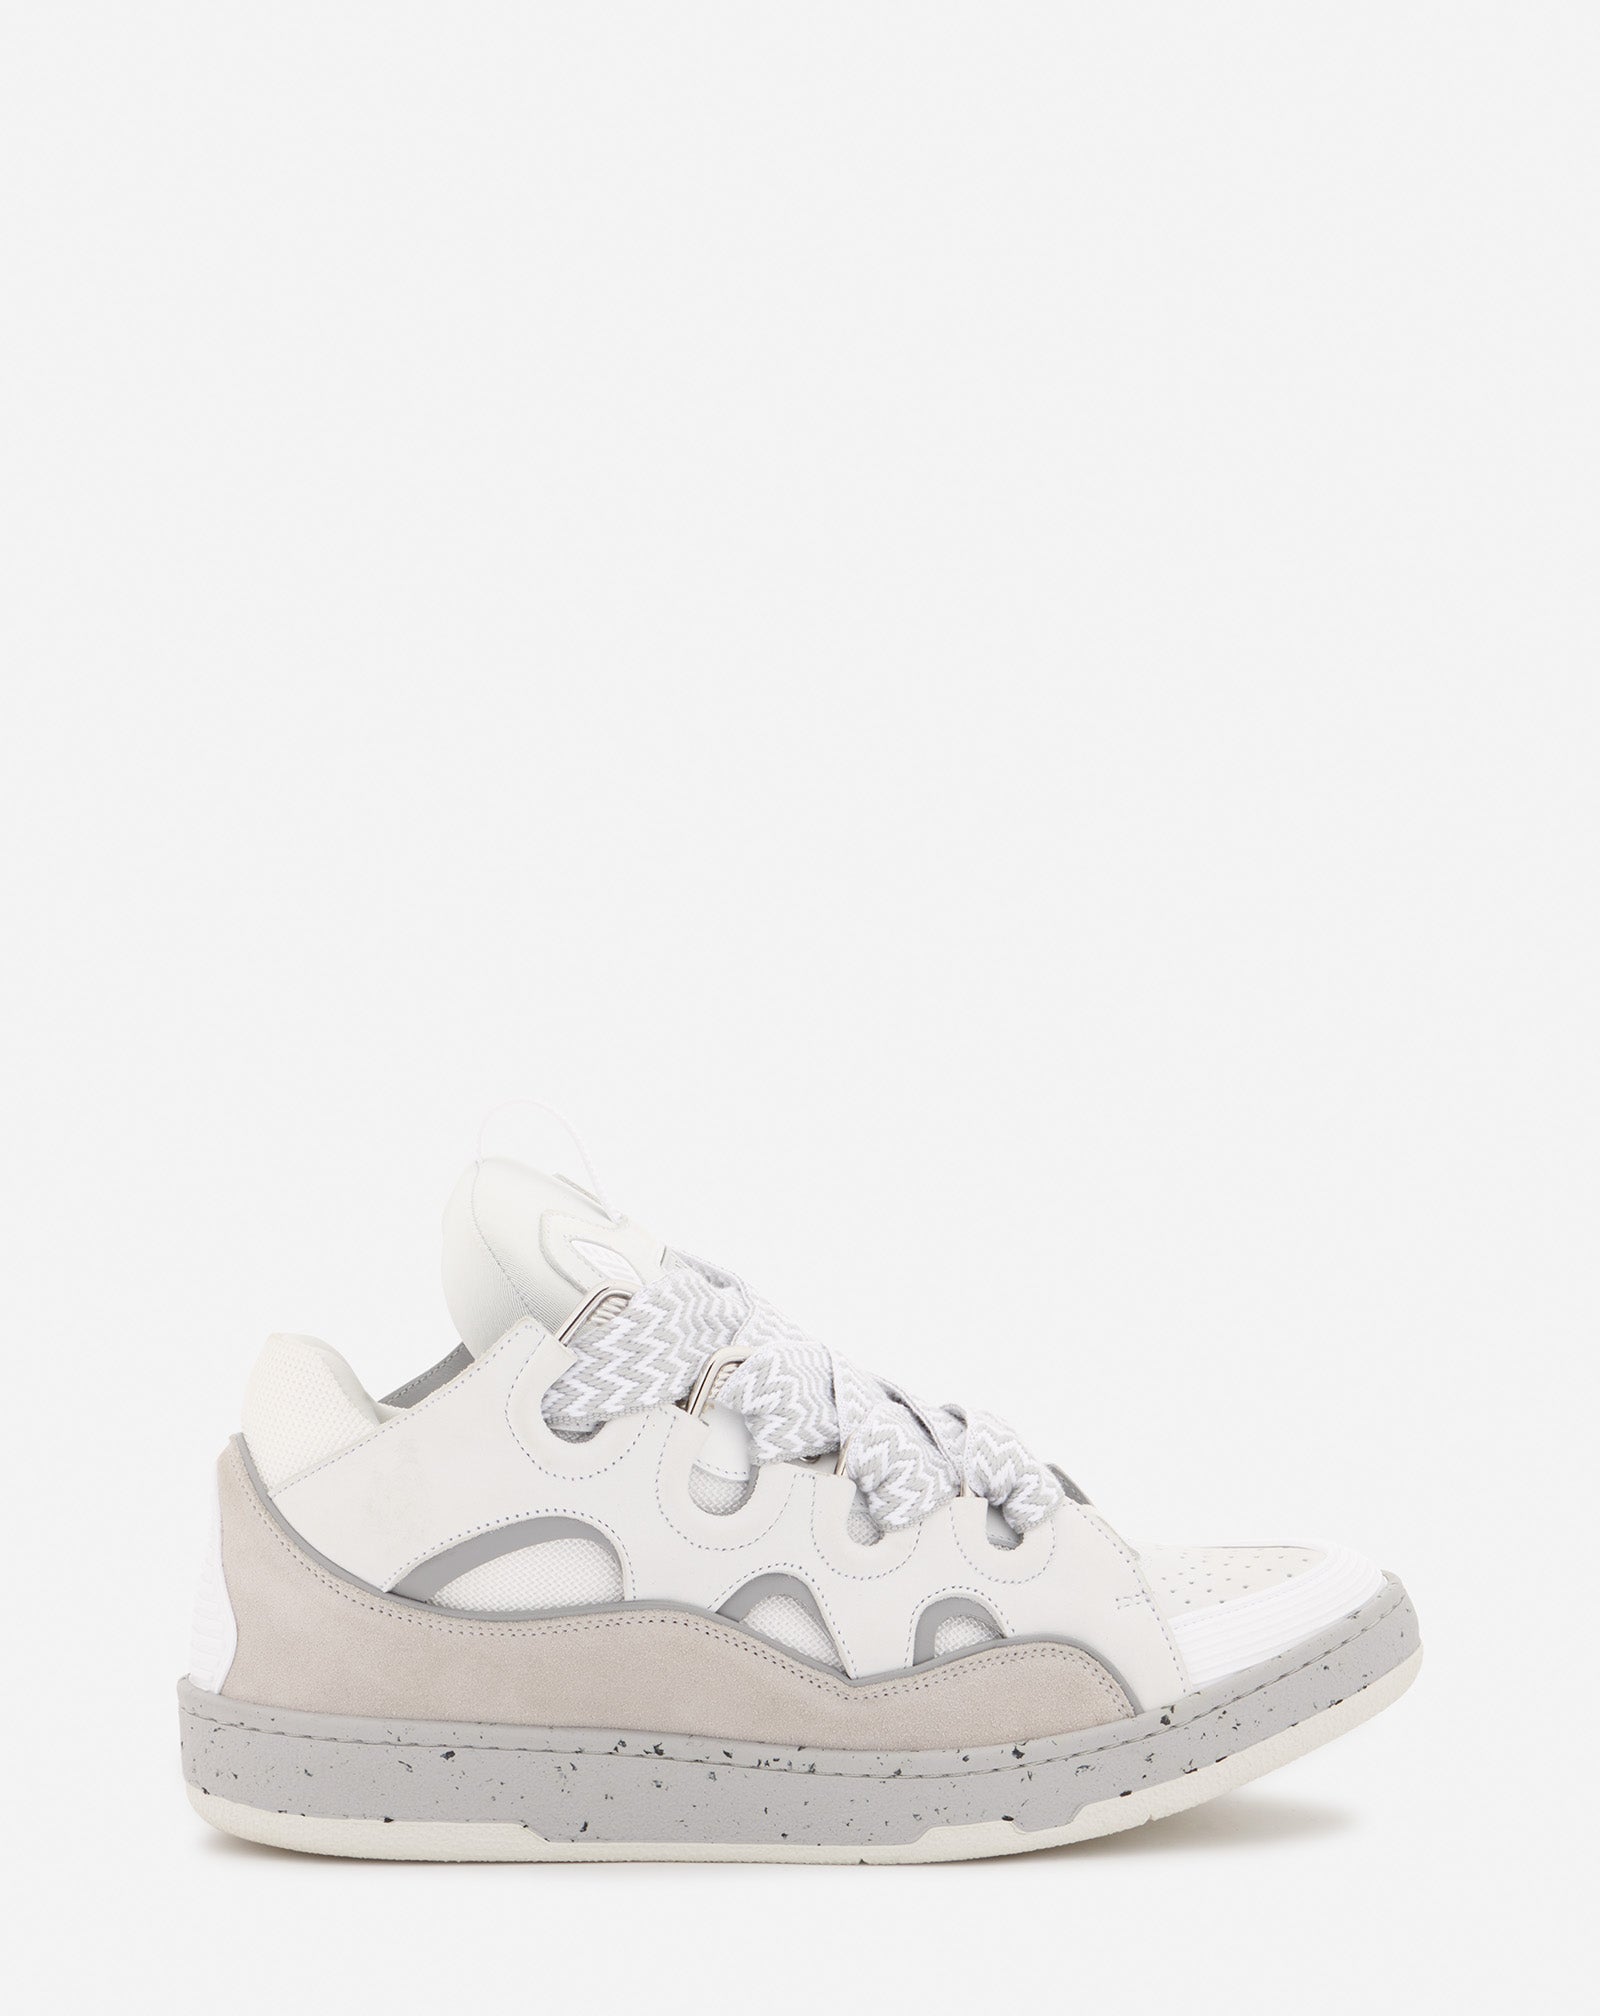 LEATHER CURB SNEAKERS GREY/WHITE | Lanvin – LANVIN